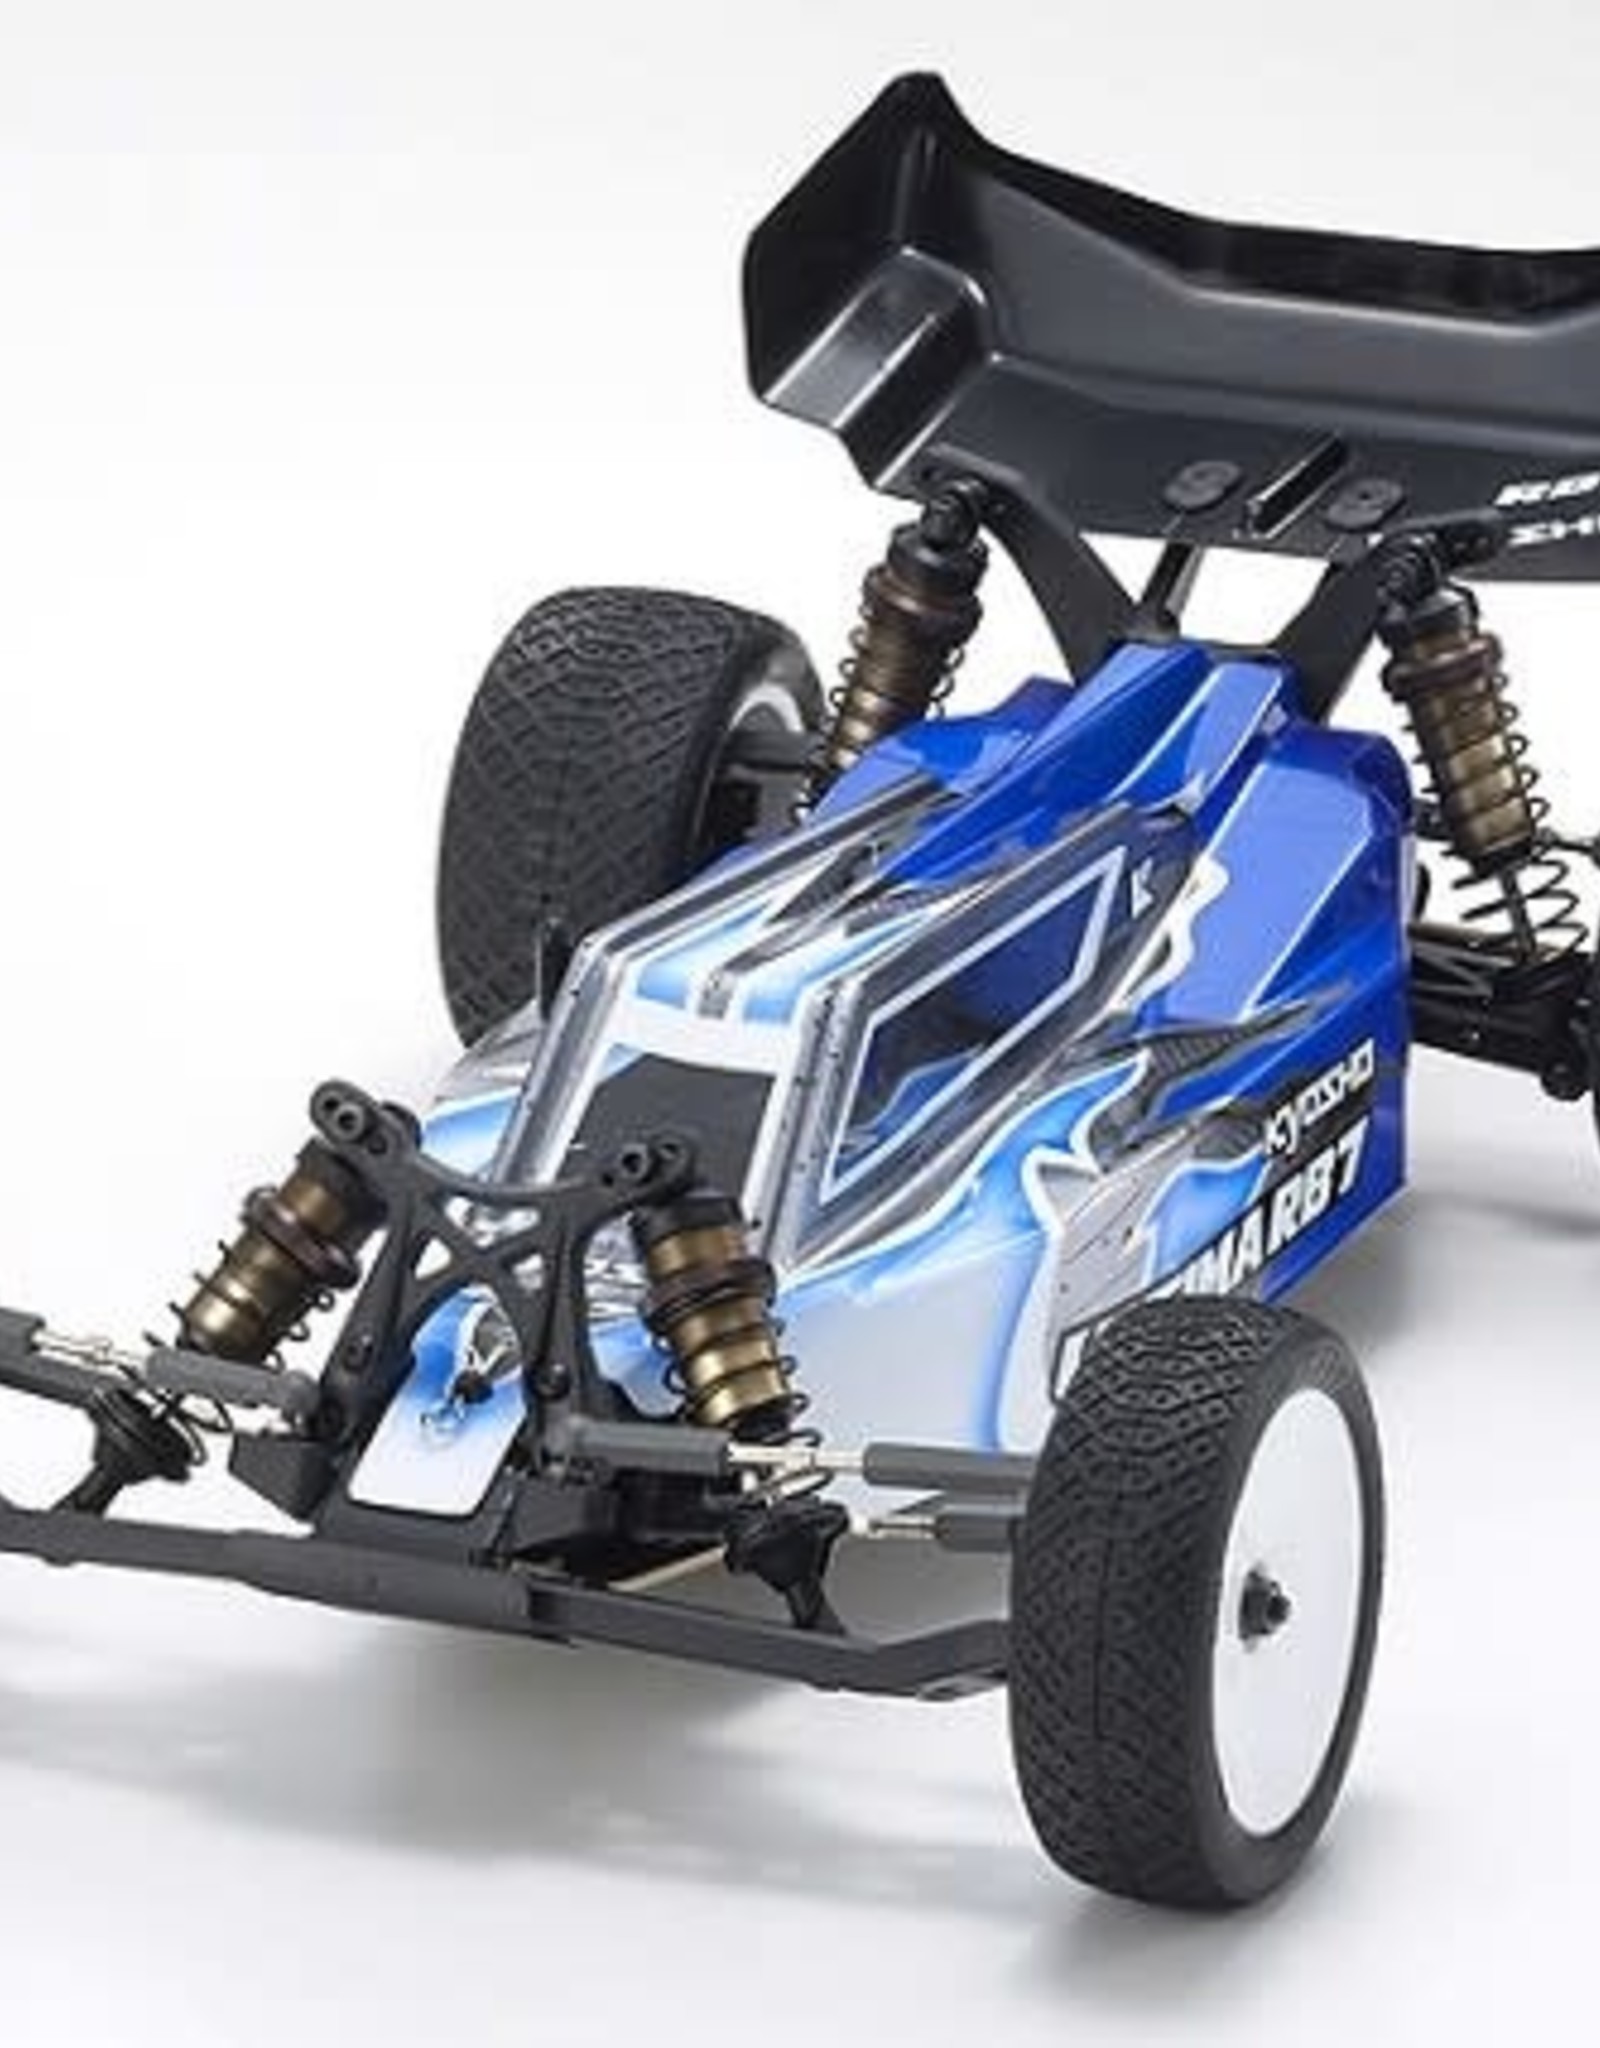 KYOSHO KYO34304 ULTIMA RB7SS Stock Spec  1/10 Scale Performance Buggy Kit.